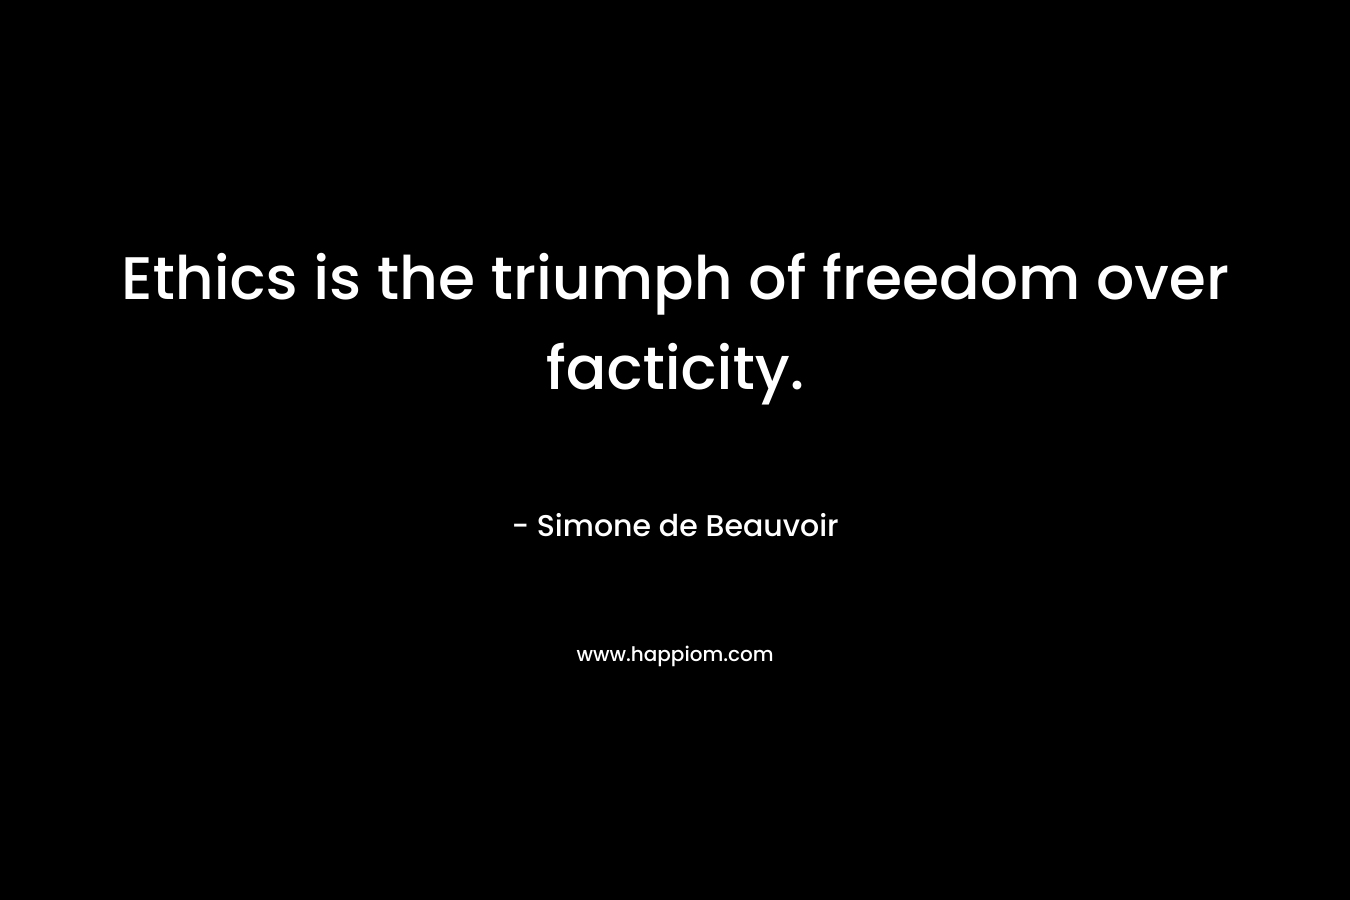 Ethics is the triumph of freedom over facticity.